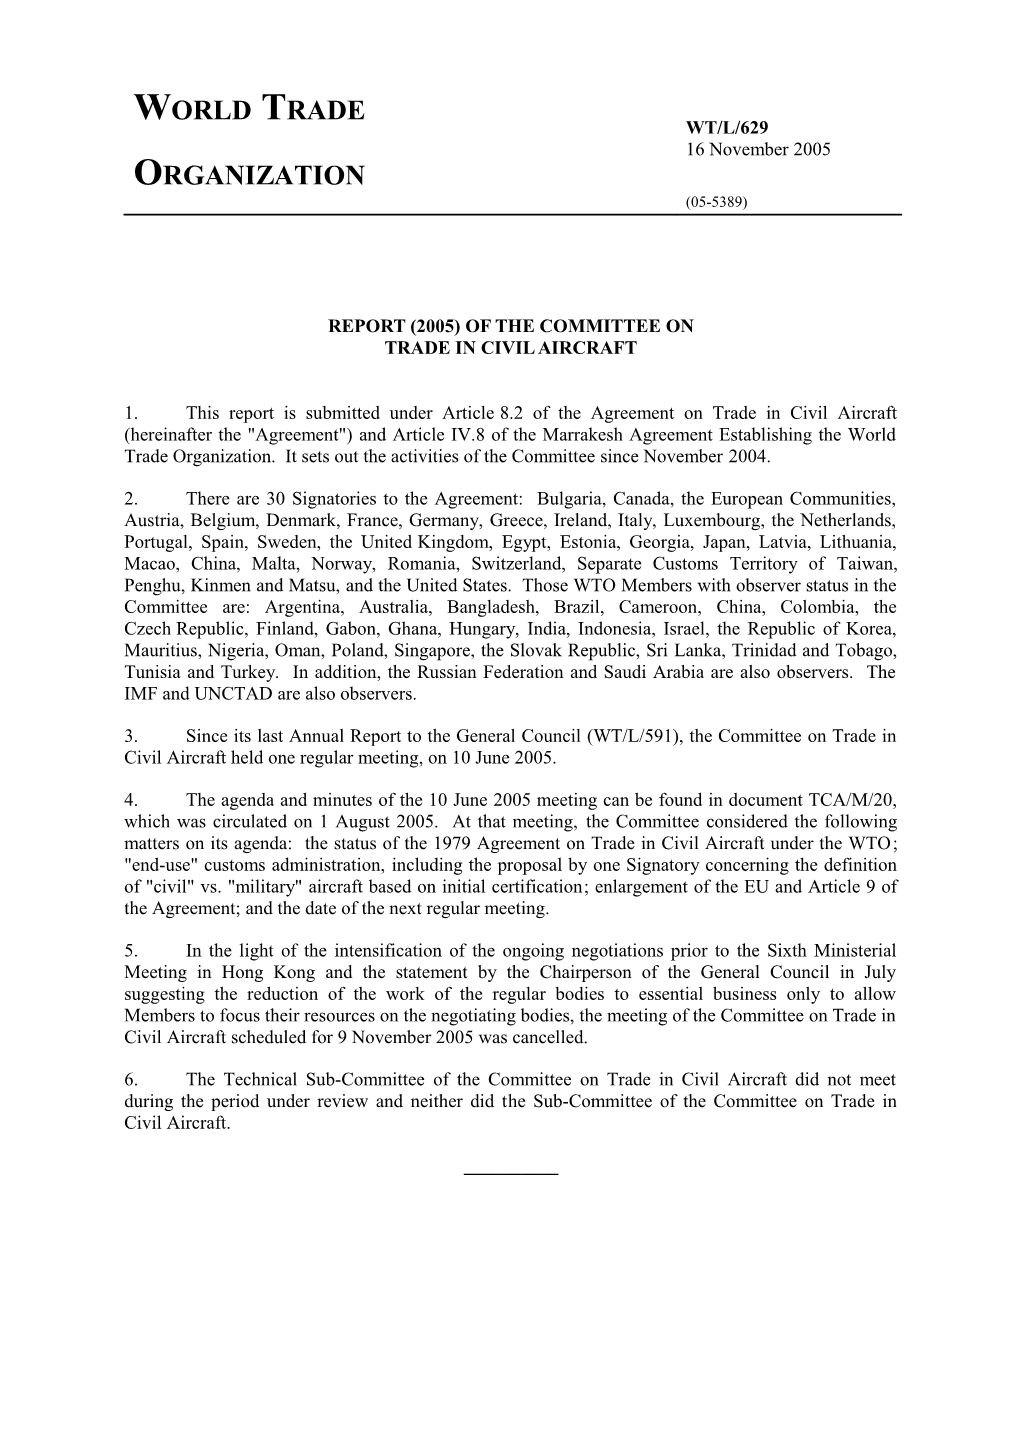 Report (2005) of the Committee On